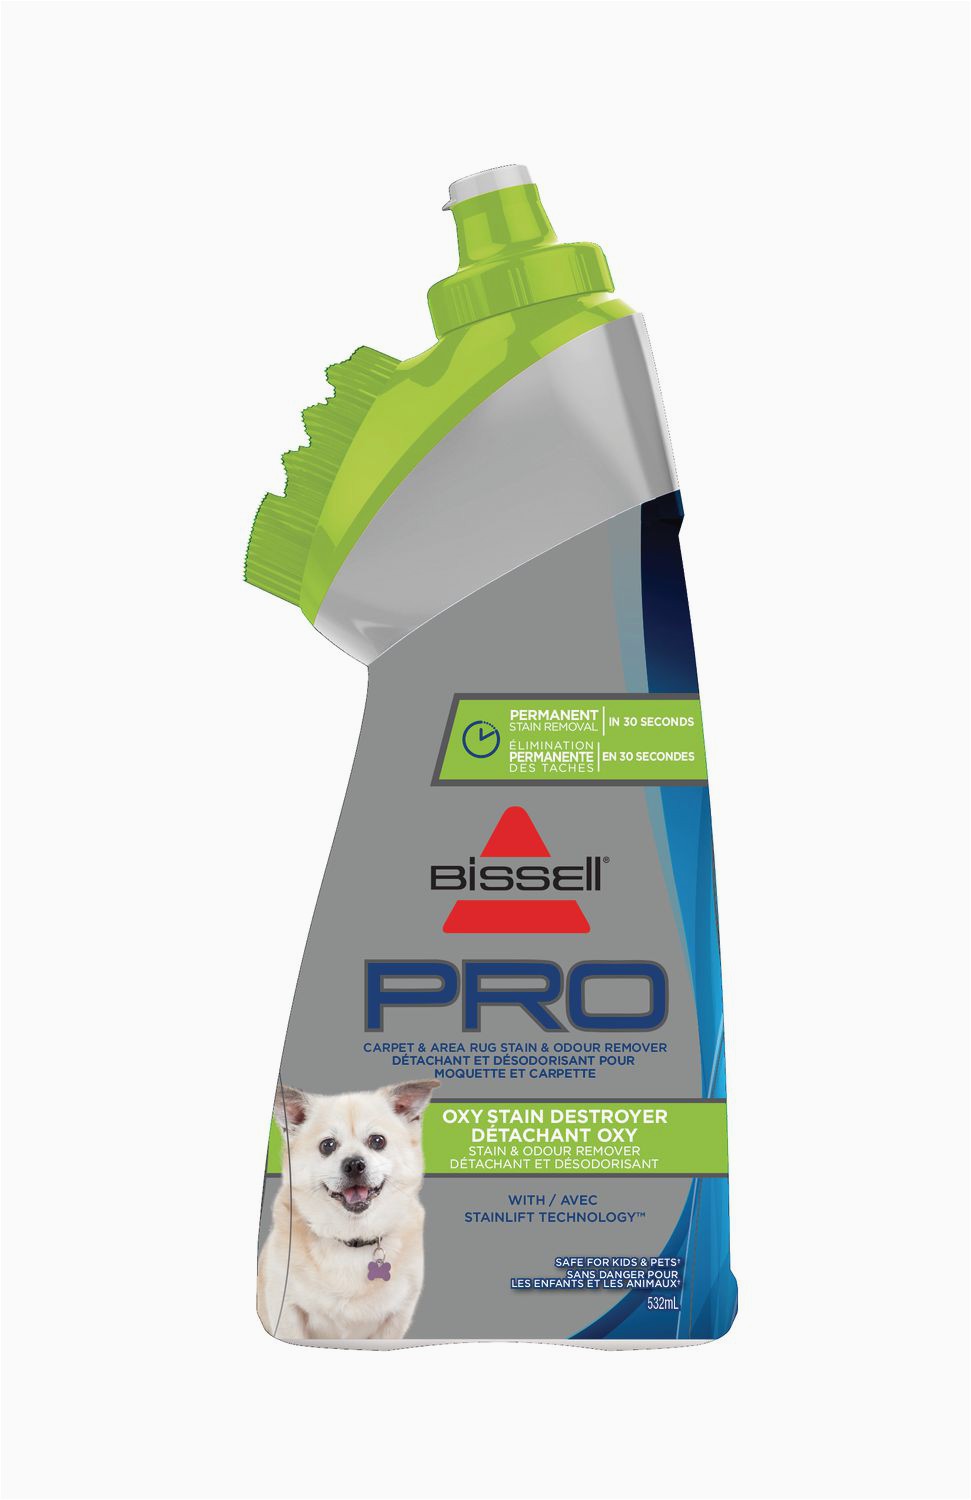 Bissell Pro Carpet and area Rug Stain Remover Bissell Oxy Stain Destroyer Stain Remover Brush with Stainlift Technology